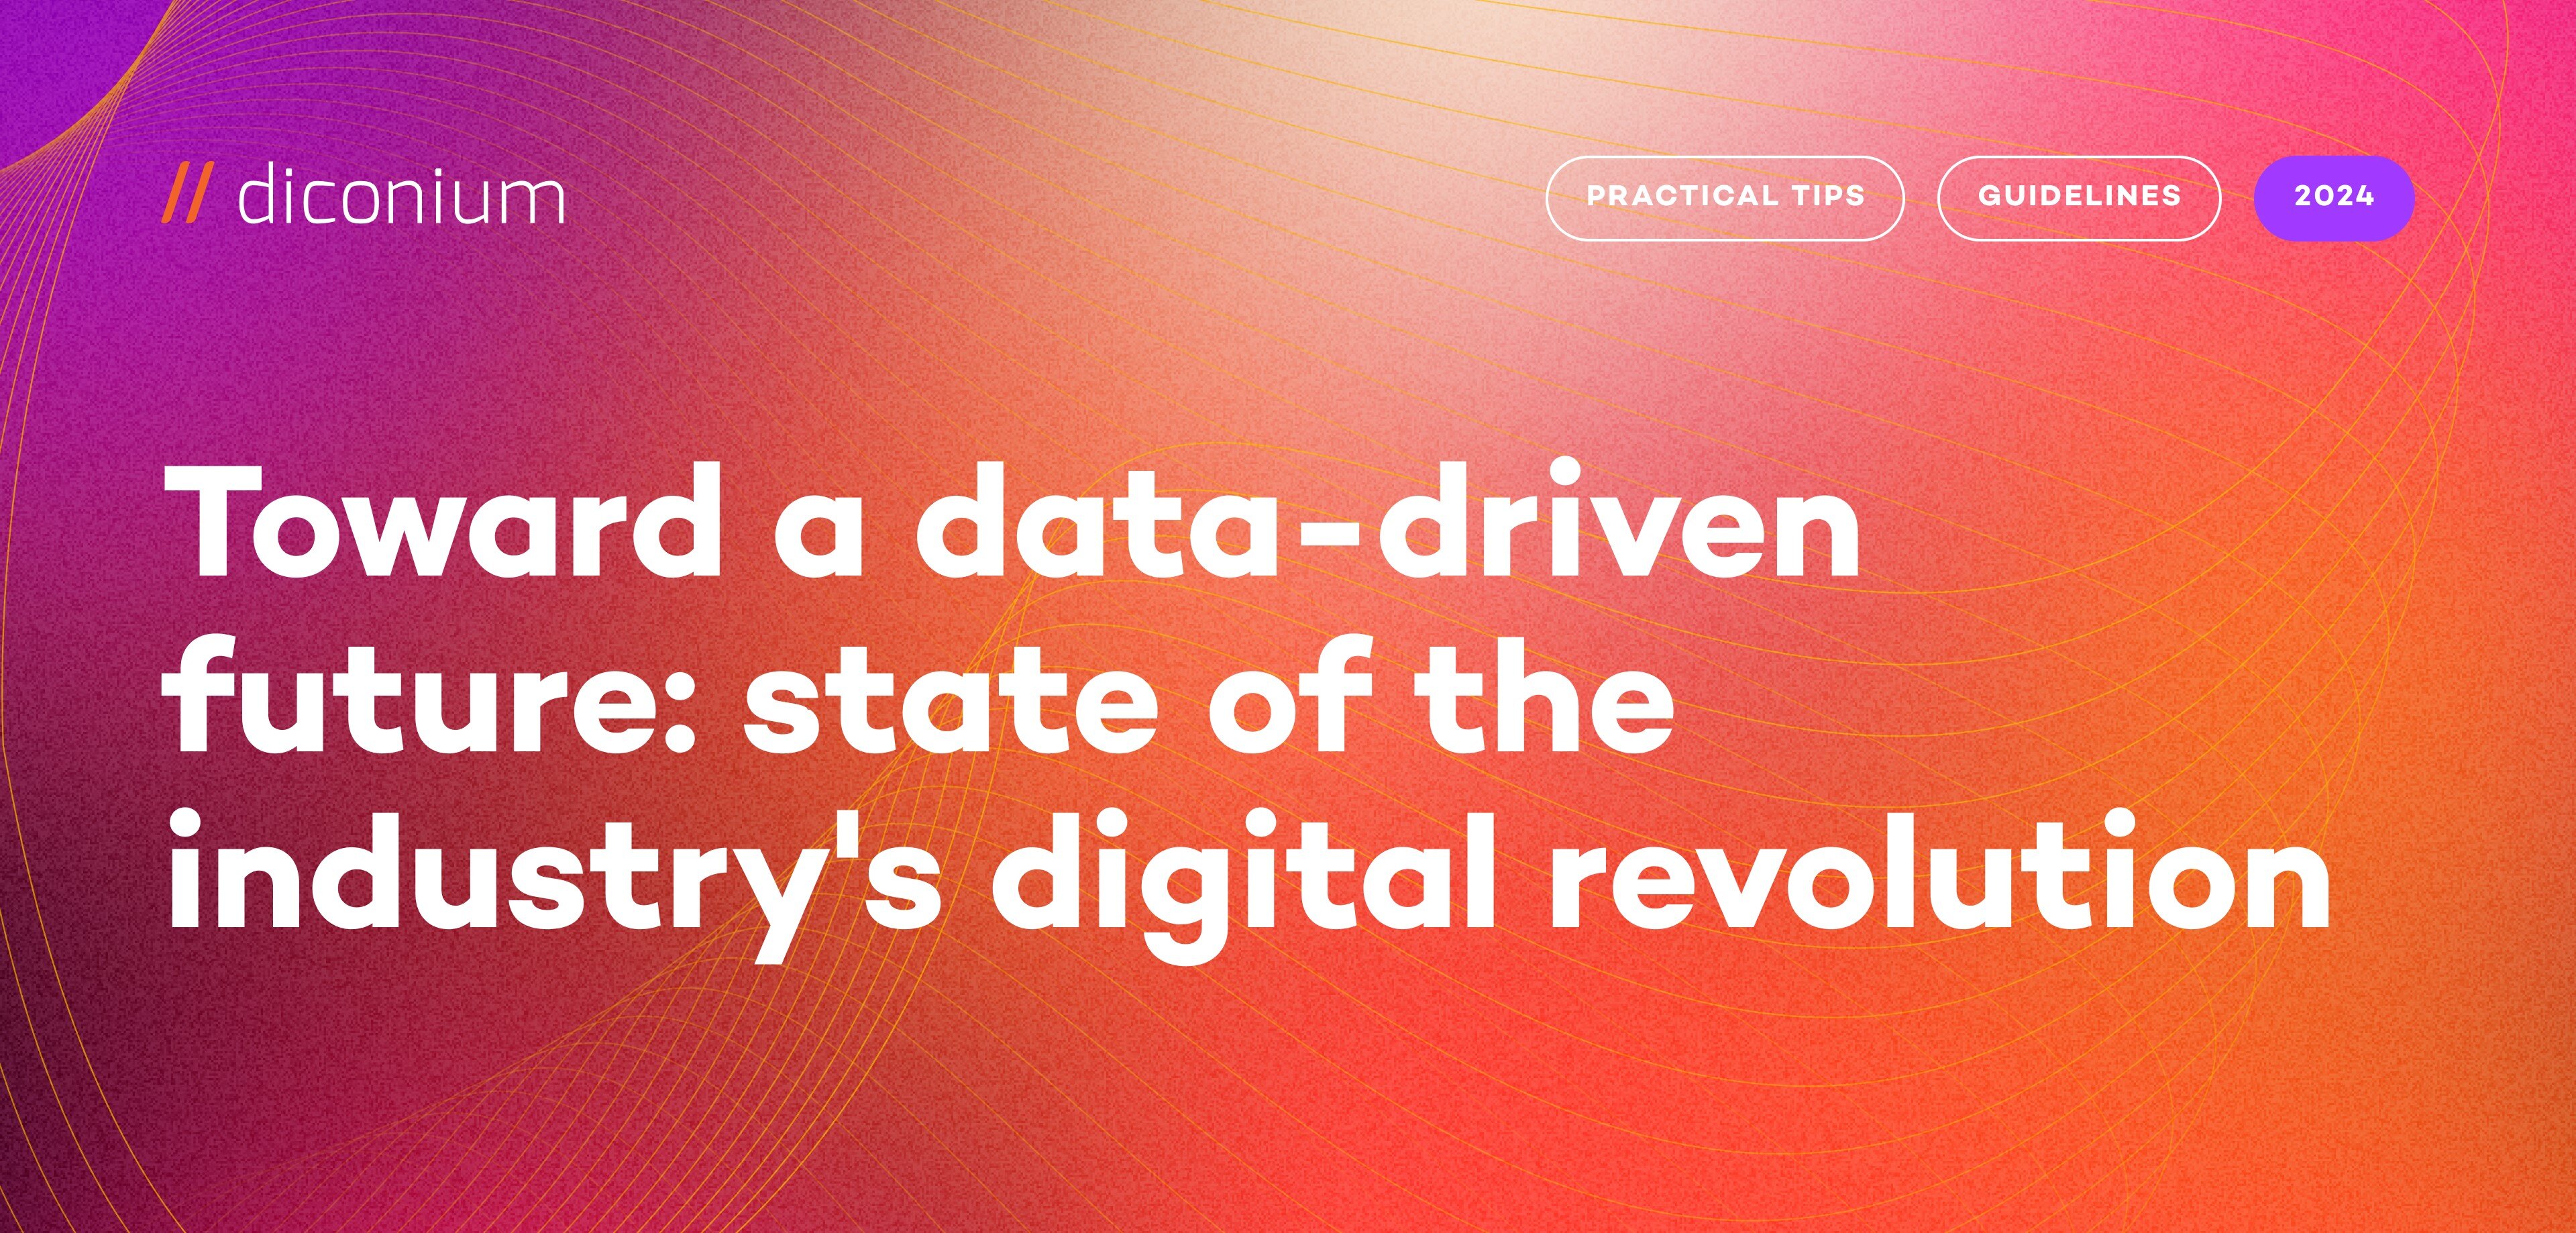 State of the industry's digital revolution: trend report